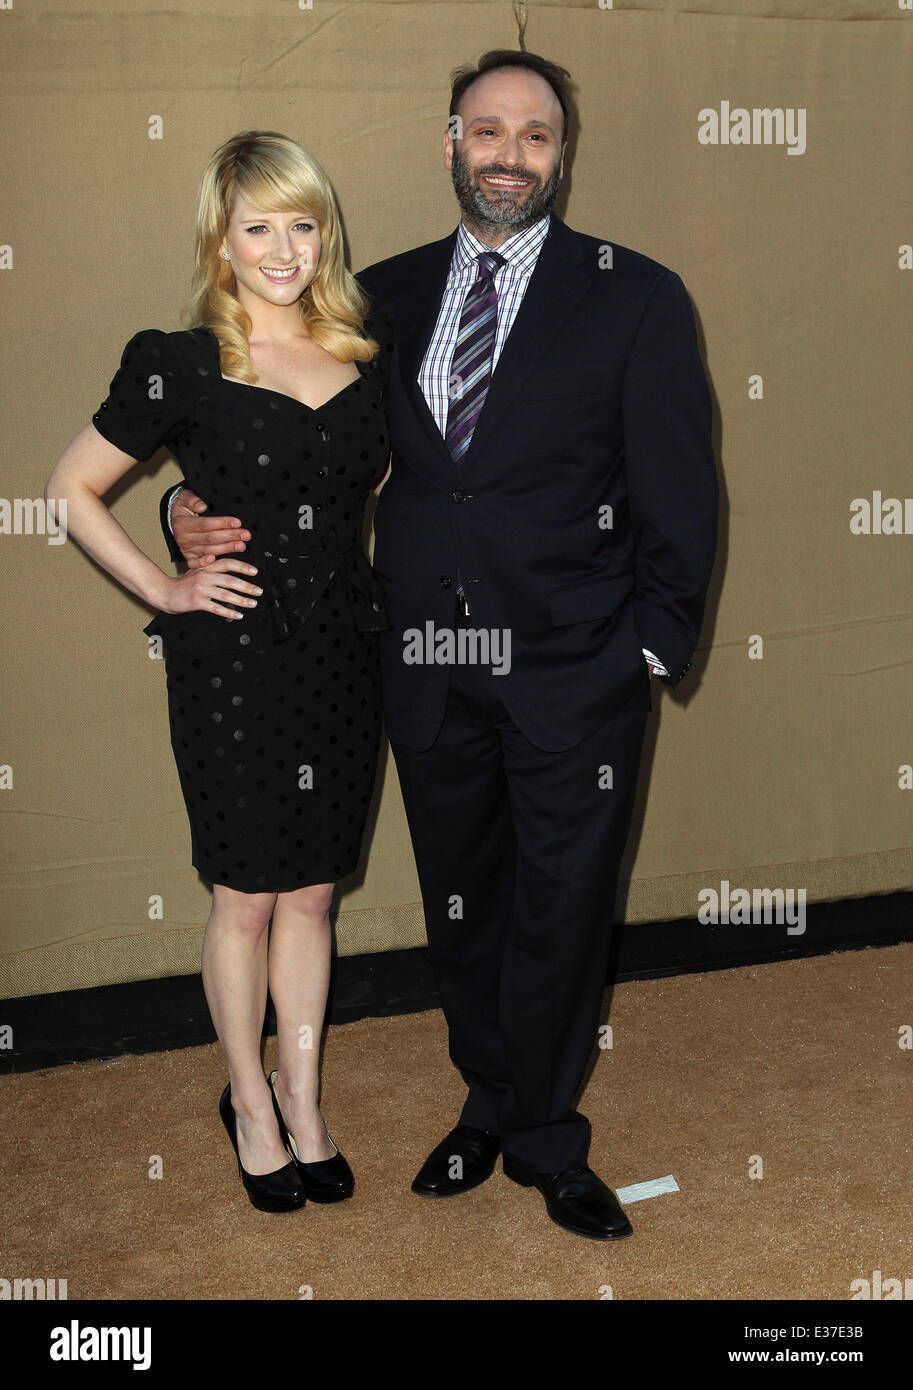 Winston Rauch Melissa Rauch High Resolution Stock Photography and Images -  Alamy